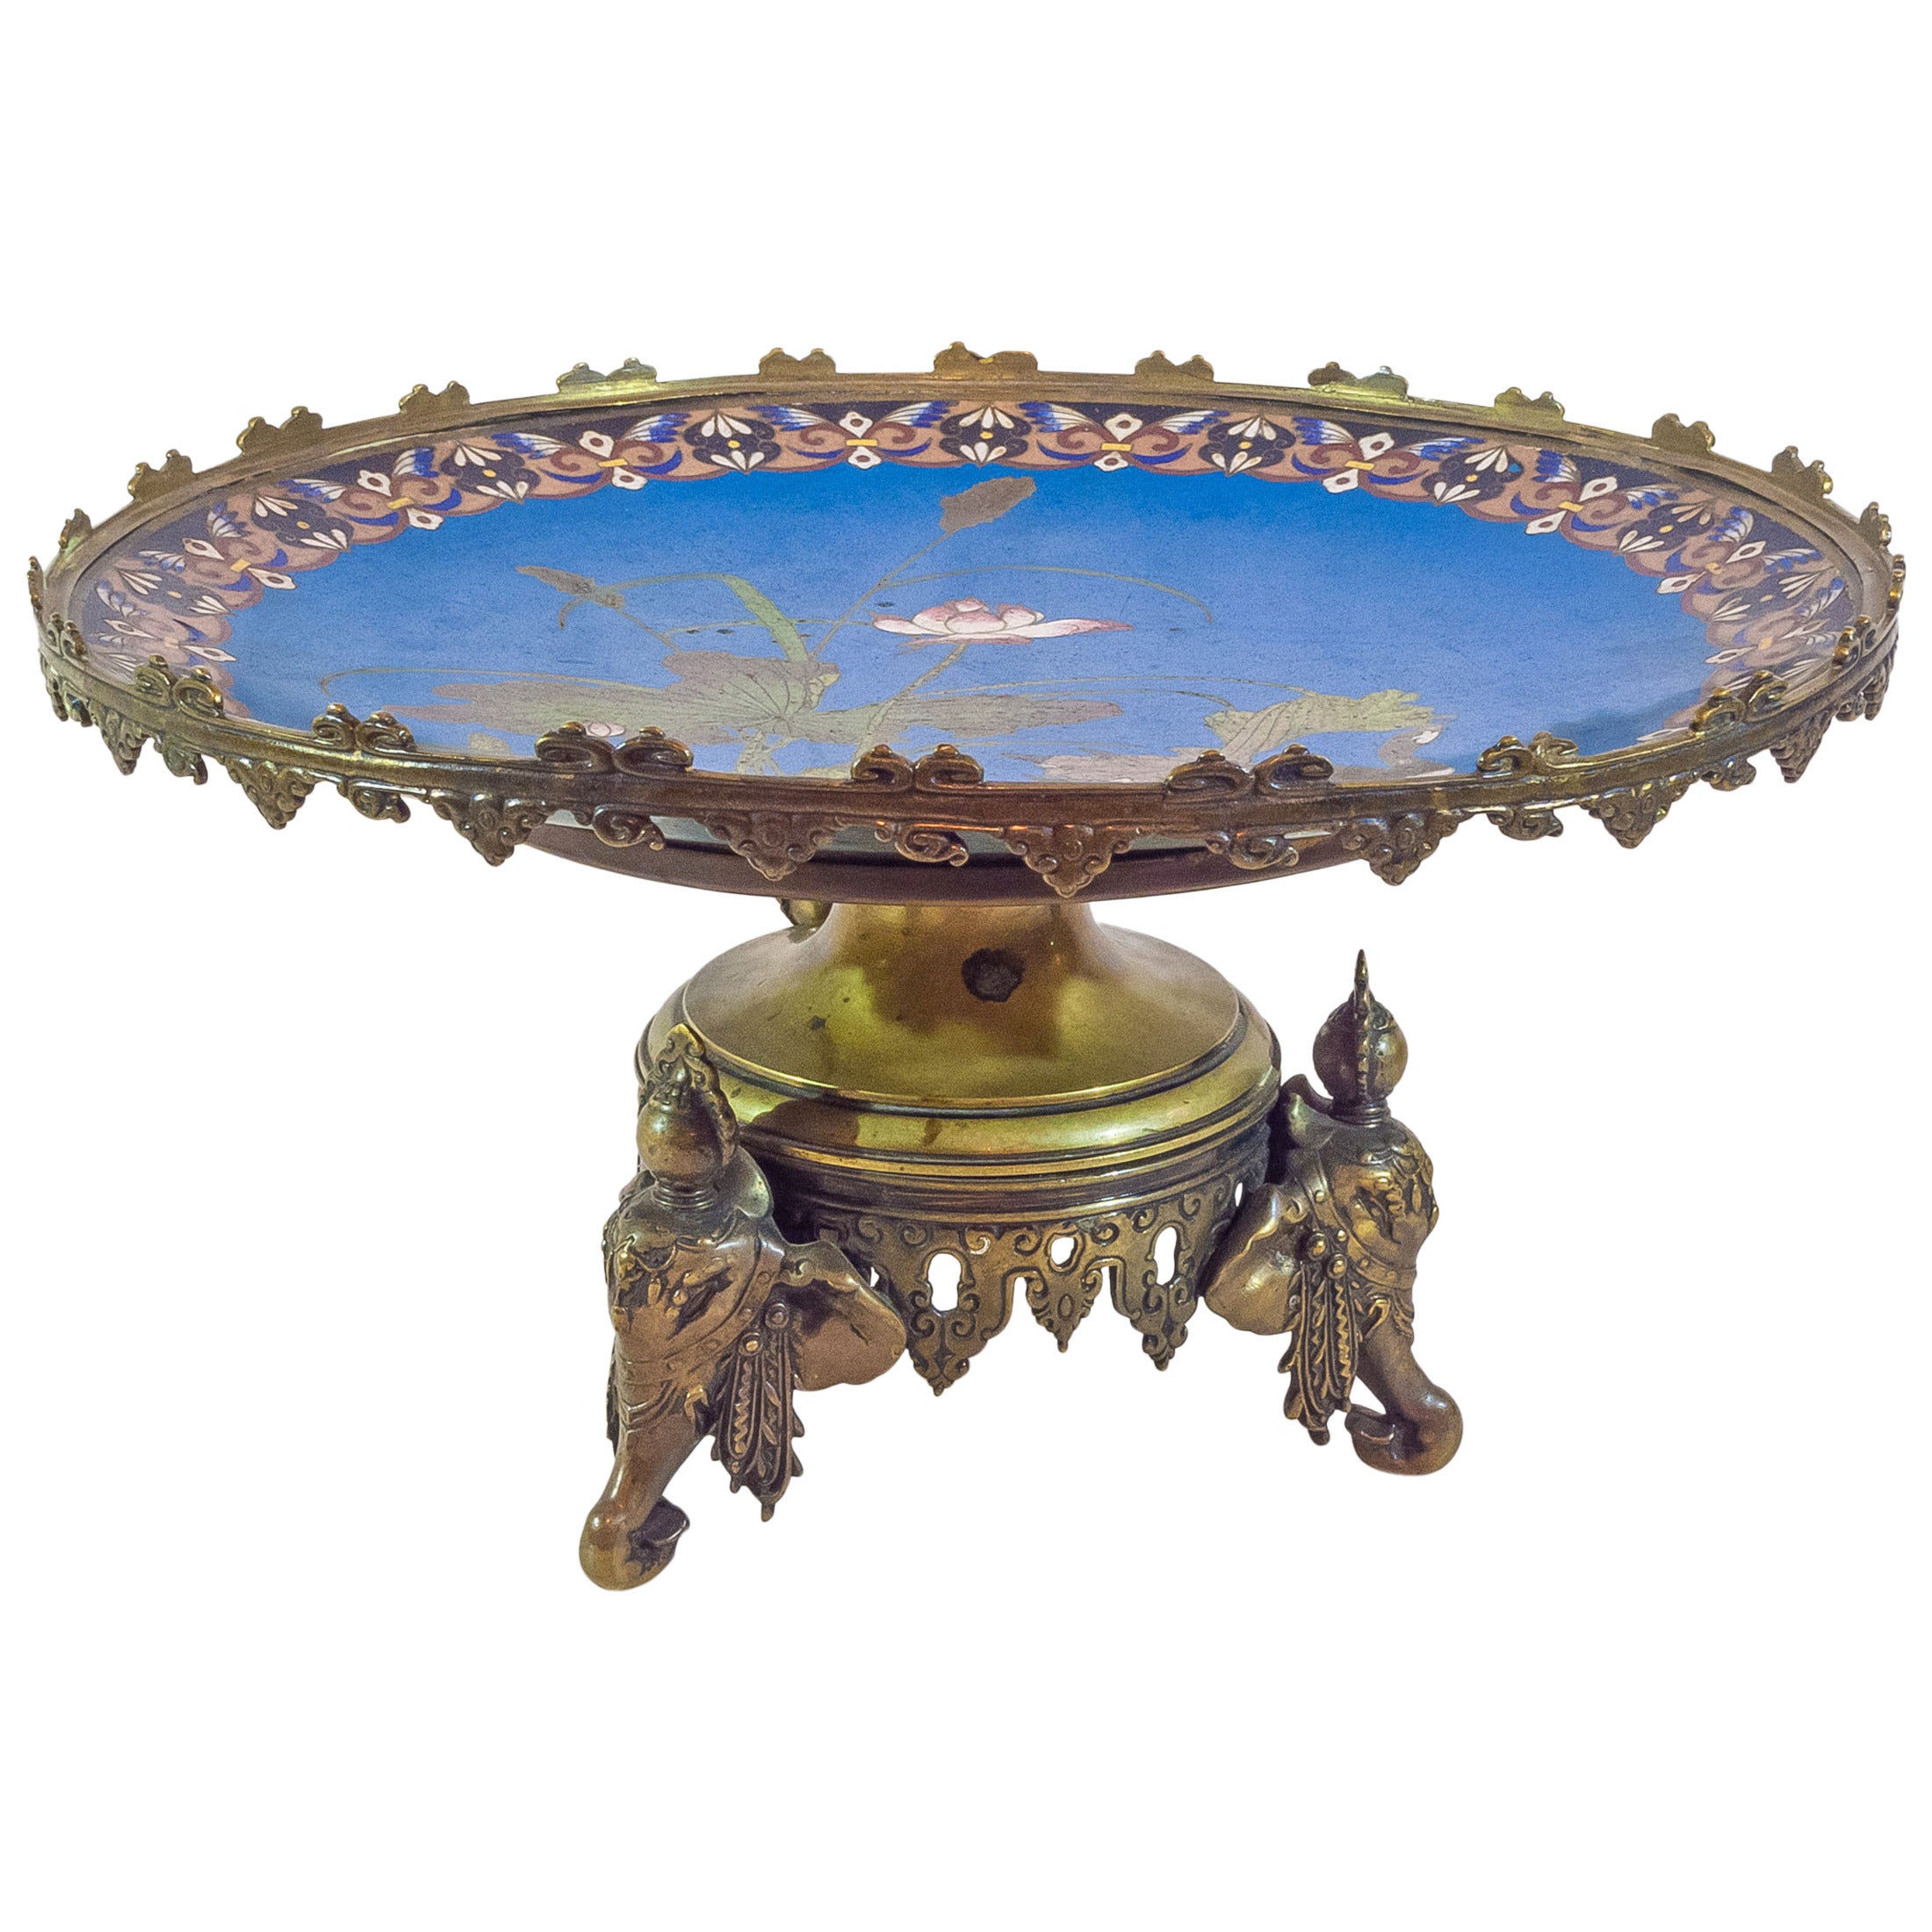 Bronze and Cloisonne Enamel Footed Centerpiece